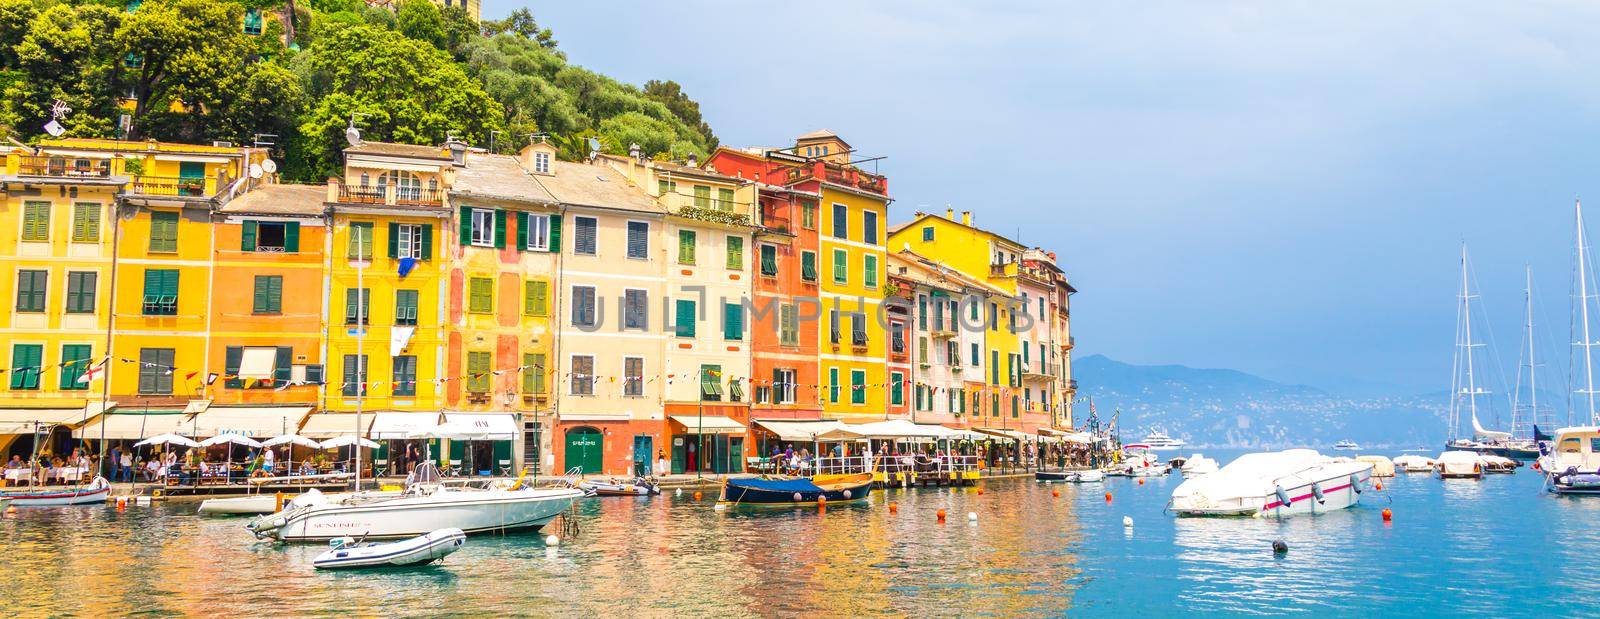 The beautiful Portofino with colorful houses and villas in little bay harbor. Liguria, Italy, Europe